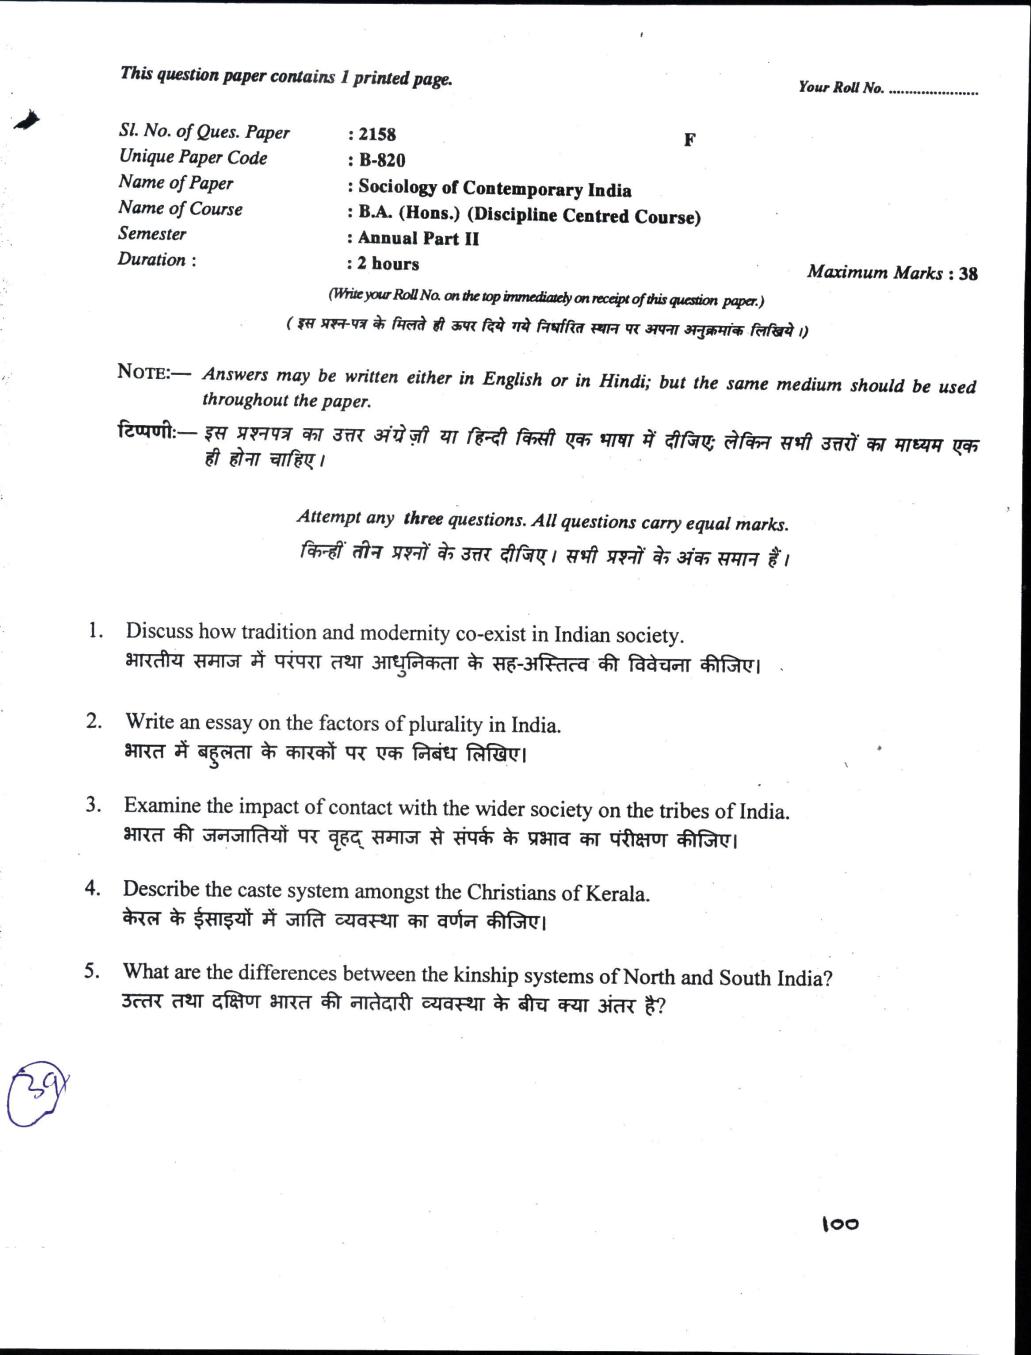 DU SOL Question Paper 2017 BA (Hons.) Sociology of Contemporary India - Page 1